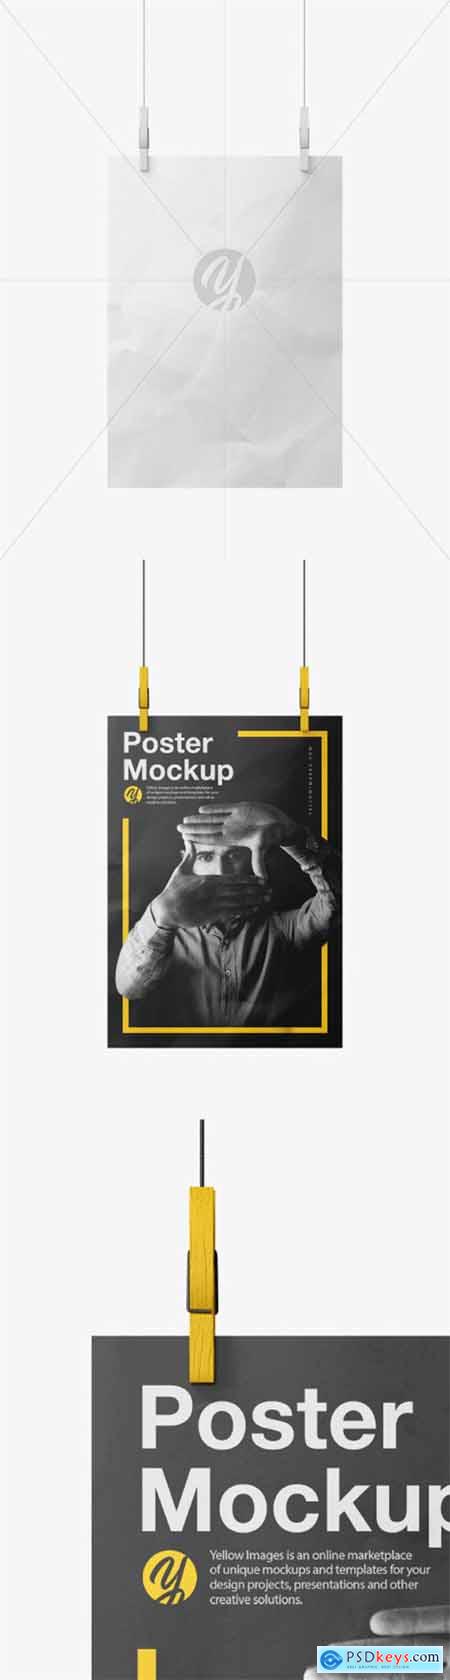 Crumpled A4 Poster Mockup 55270 Free Download Photoshop Vector Stock Image Via Torrent Zippyshare From Psdkeys Com